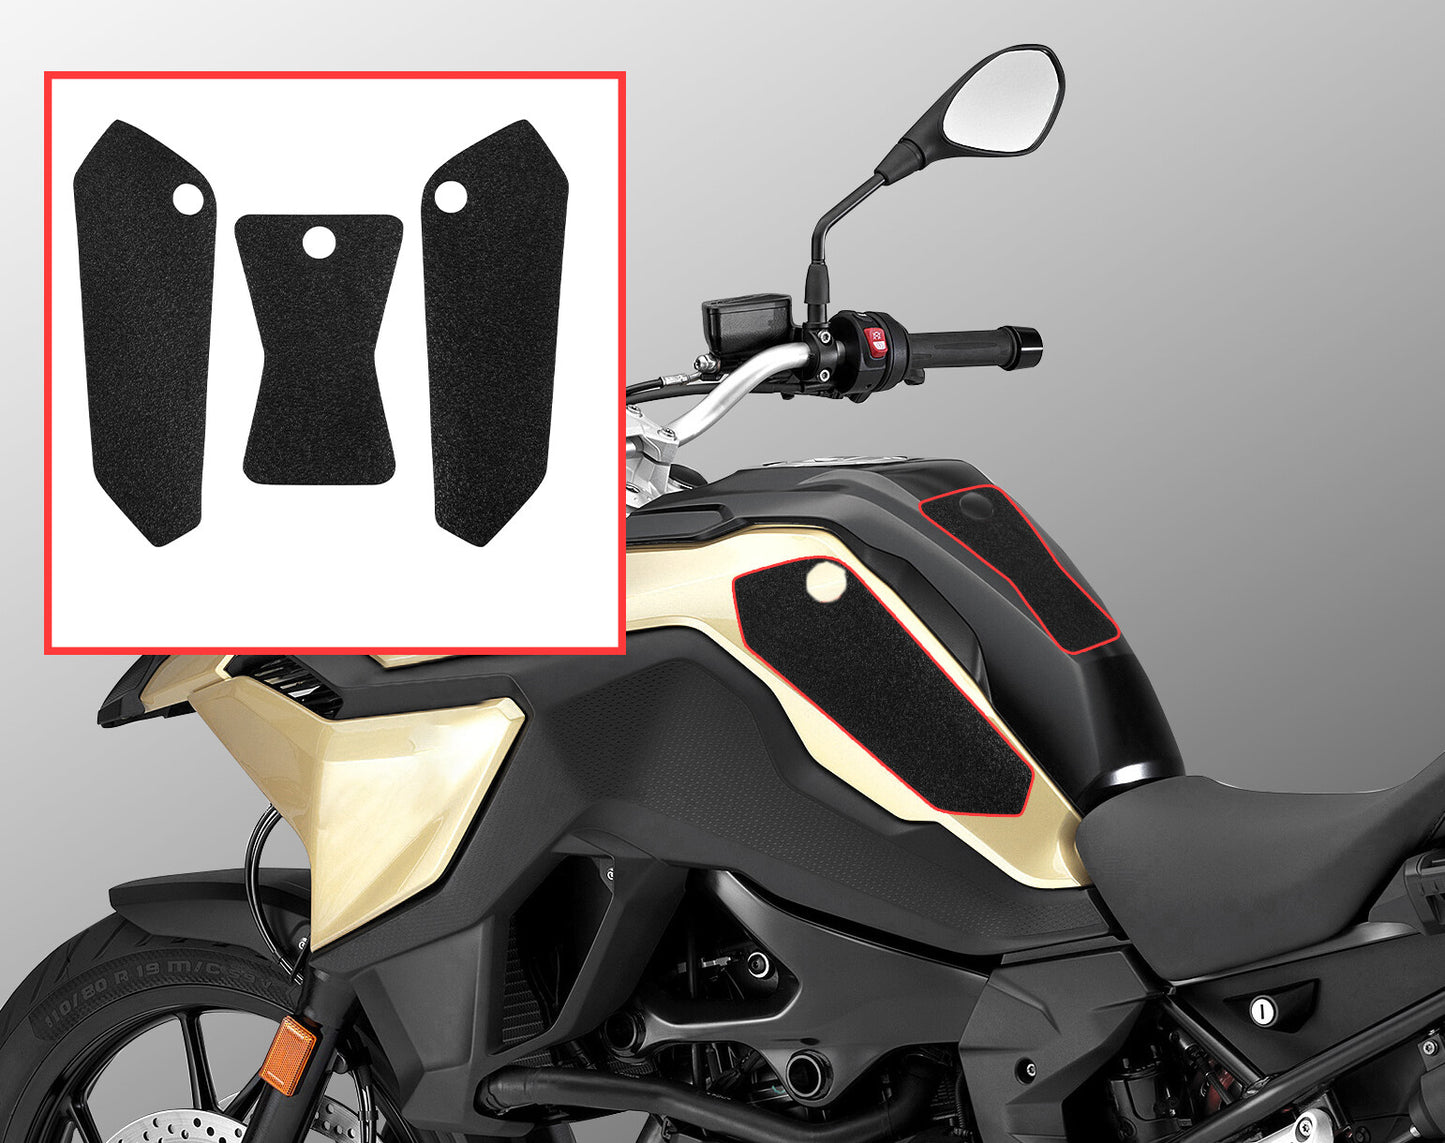 Wolfline Motorcycle Anti Slip Tank Pad Stickers Side Gas Tank Pad Knee Grip Decals Protection For BMW F750GS F850GS 750 850 GS 2018 2019 2020 2021 2022